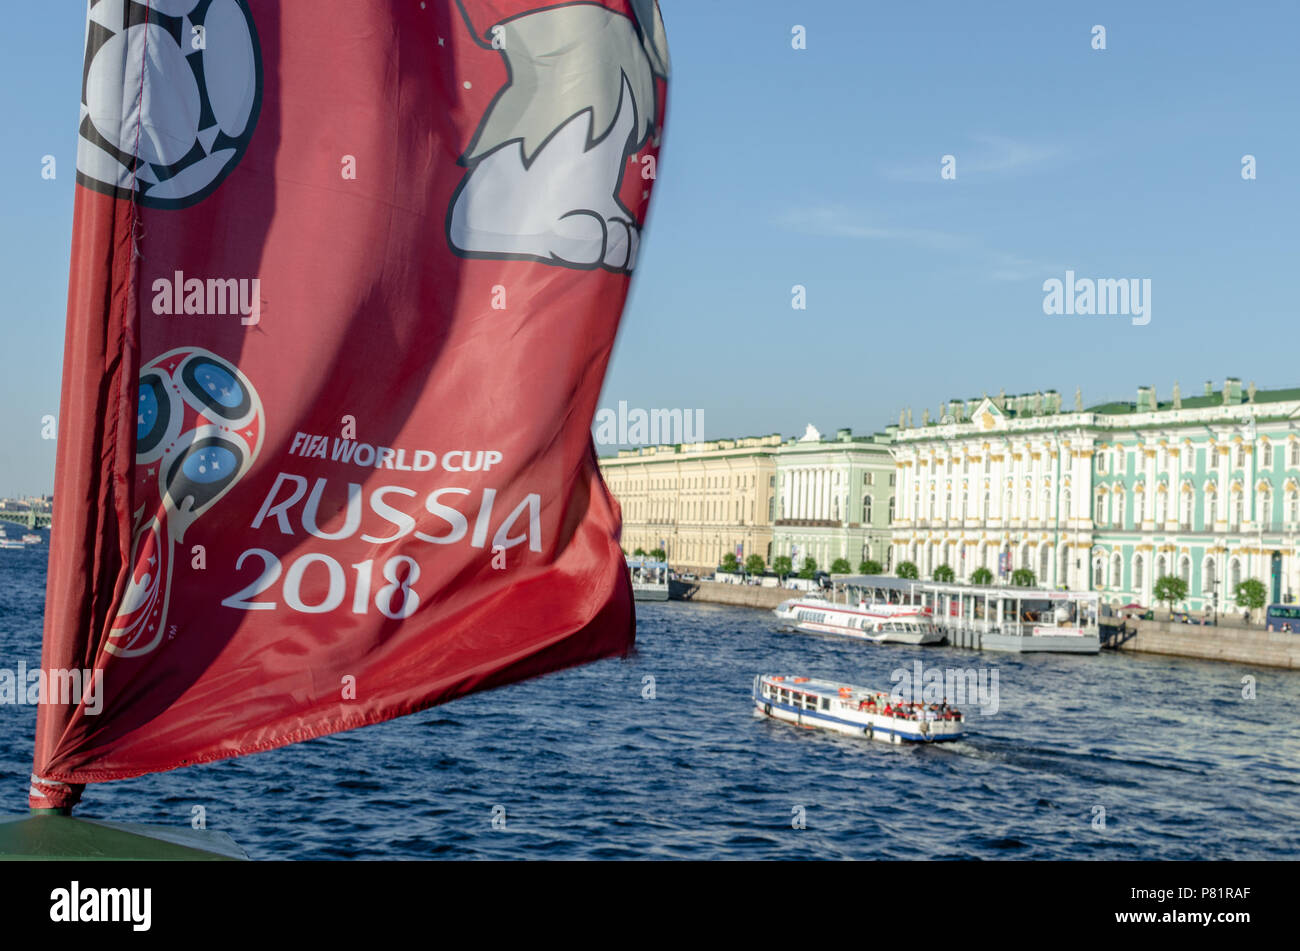 Flag with the official Russia 2018 world cup mascot and logo on the Neva river overlooking the Winter Palace in St Petersburg. Stock Photo